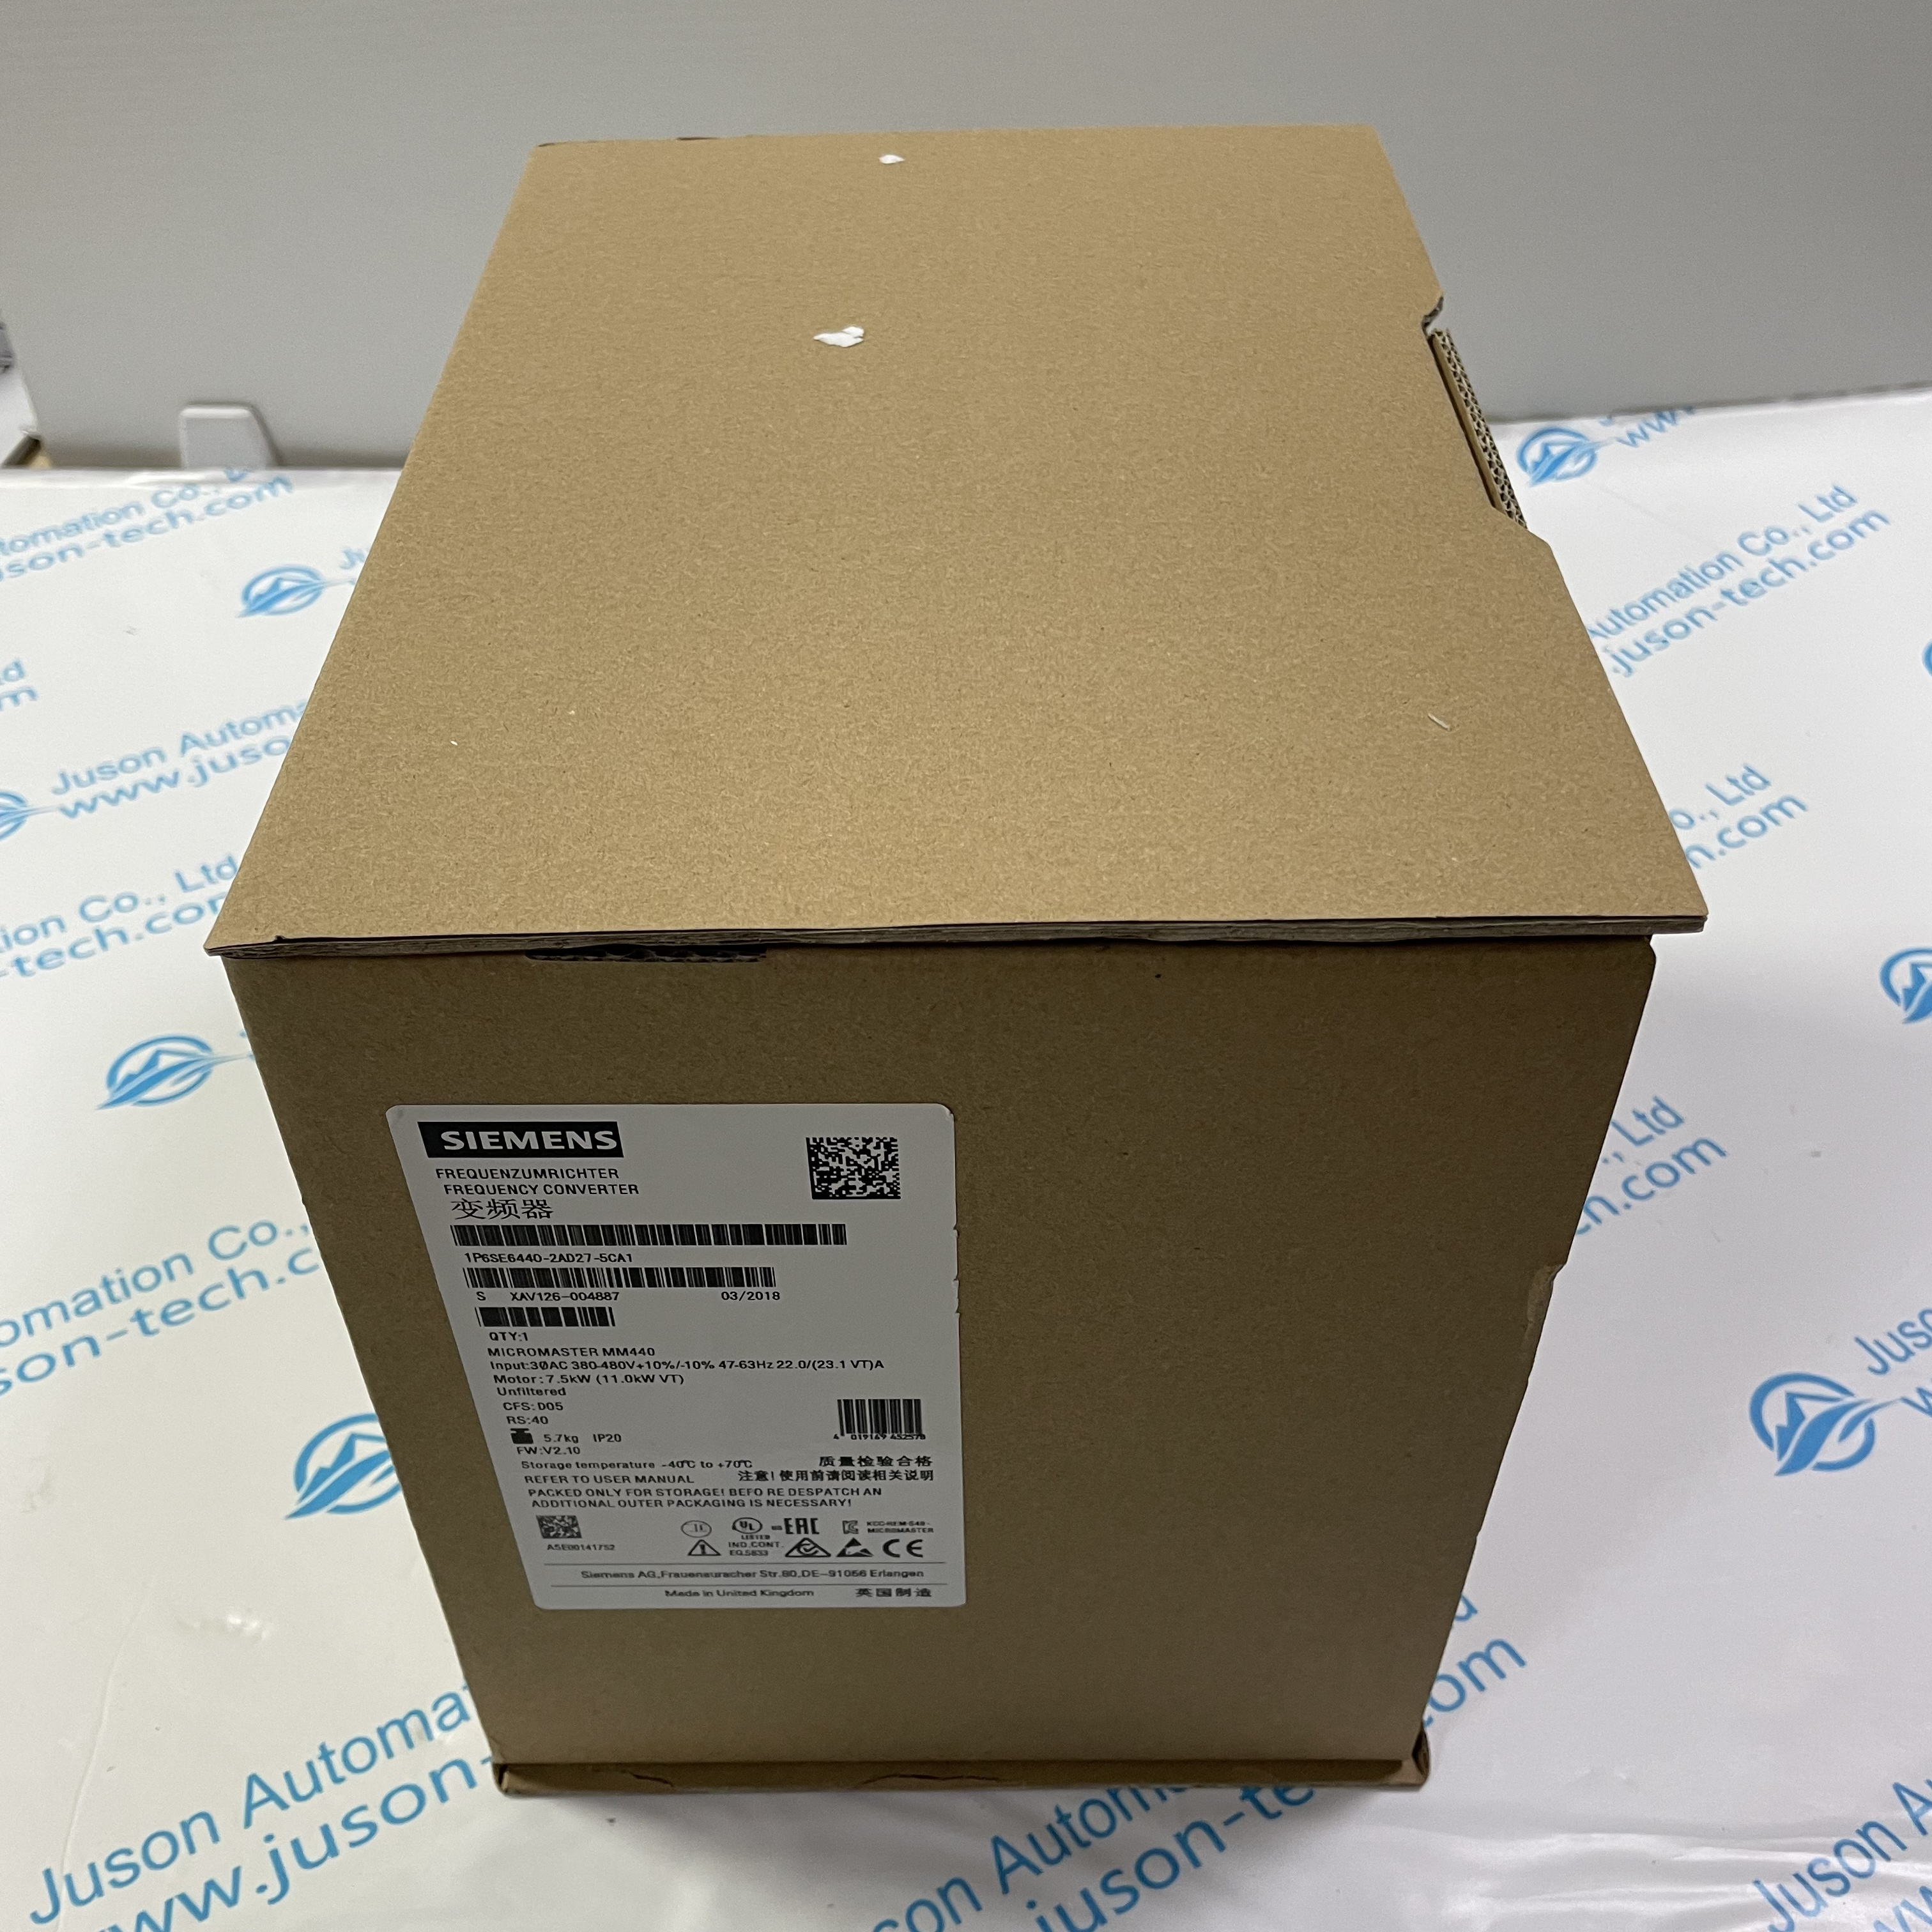 SIEMENS inverter 6SE6440-2AD27-5CA1 MICROMASTER 440 built-in class A filter 380-480 V 3 AC +10/-10% 47-63 Hz constant torque 7.5 kW overload 150% 60 s